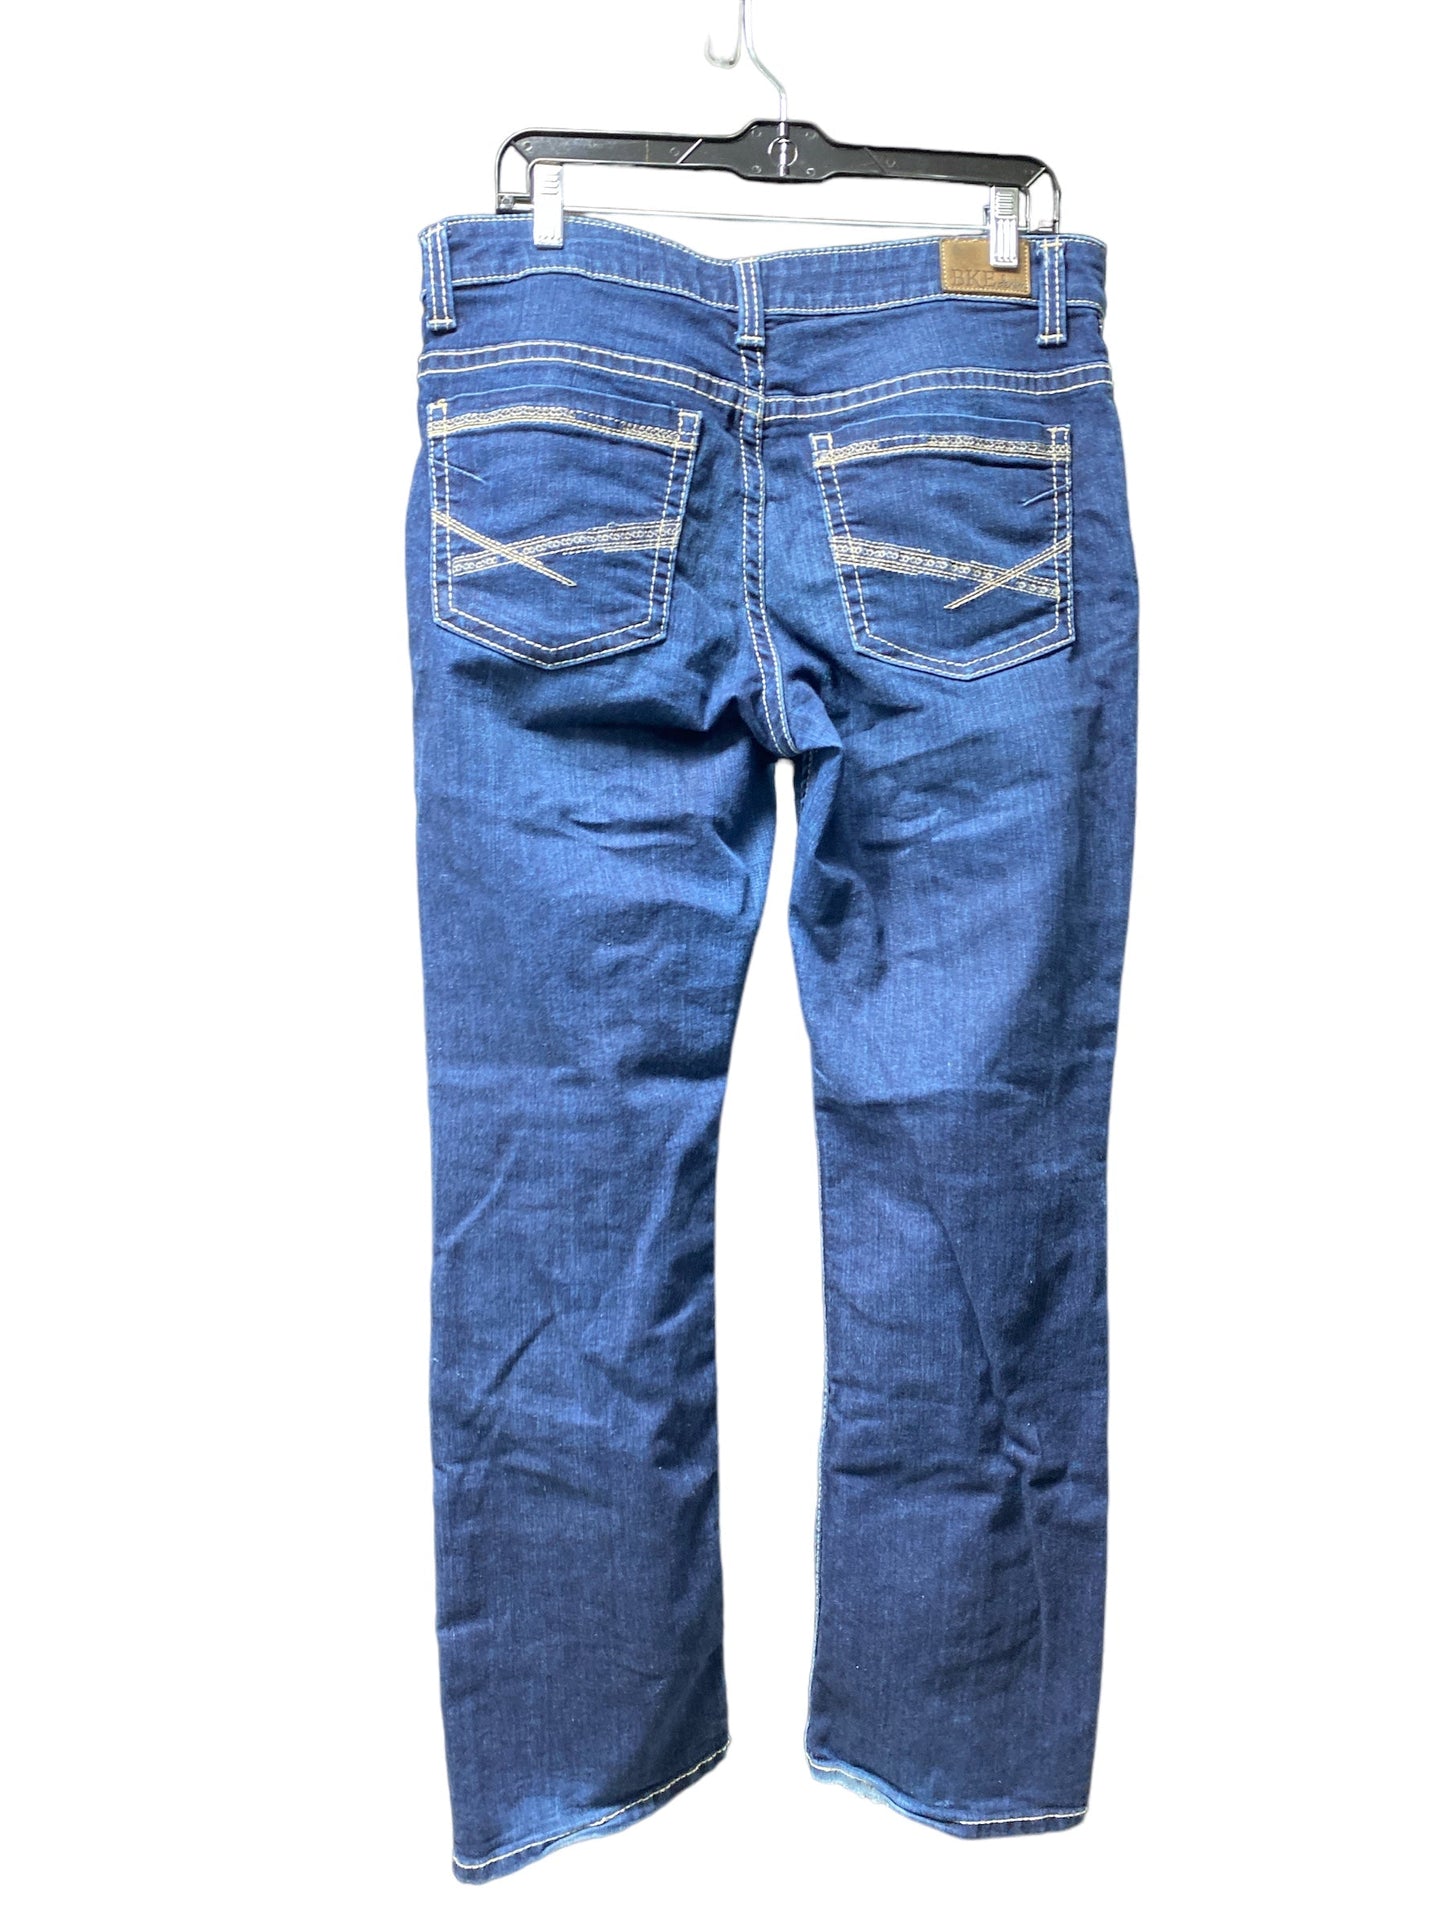 Jeans Boot Cut By Bke  Size: 8